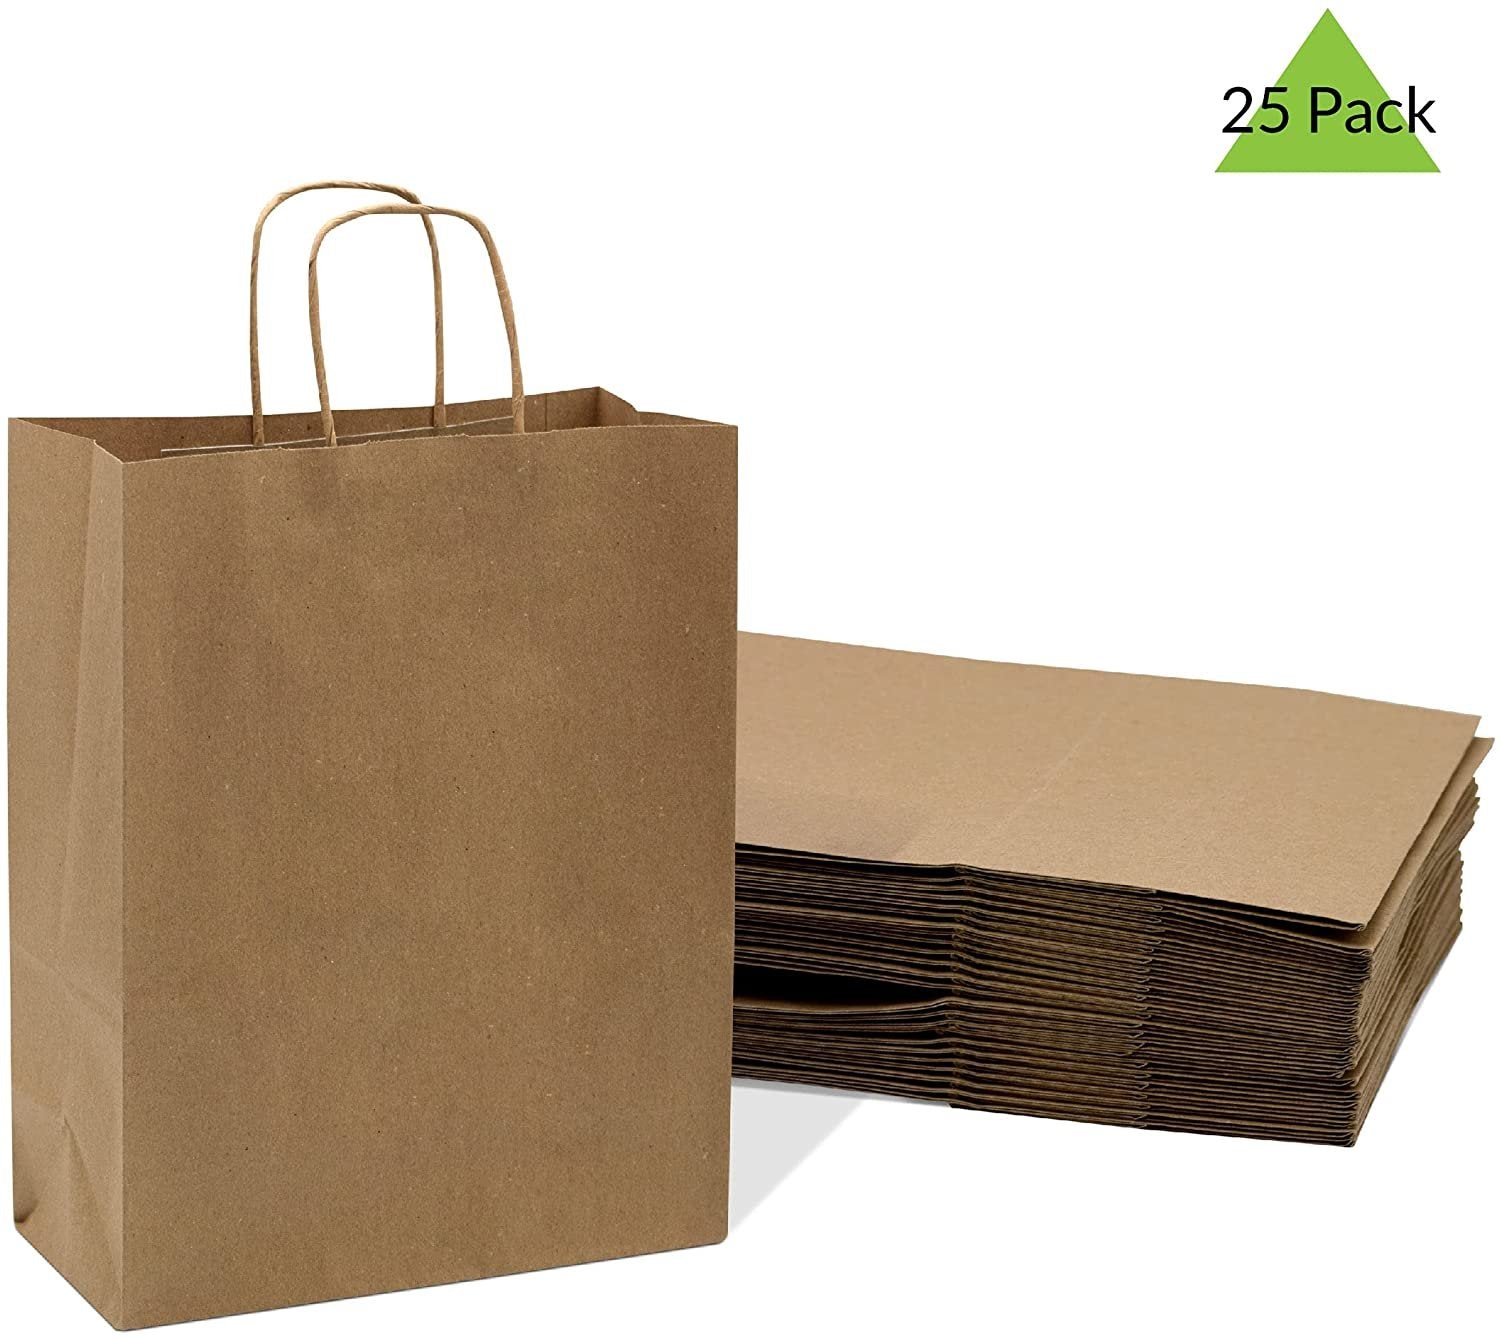 Brown Kraft Paper Bags with Handles, Birthday Parties, Restaurant takeouts, Shopping, Merchandise, Party, Retail, Gift Bags 10x5x13"